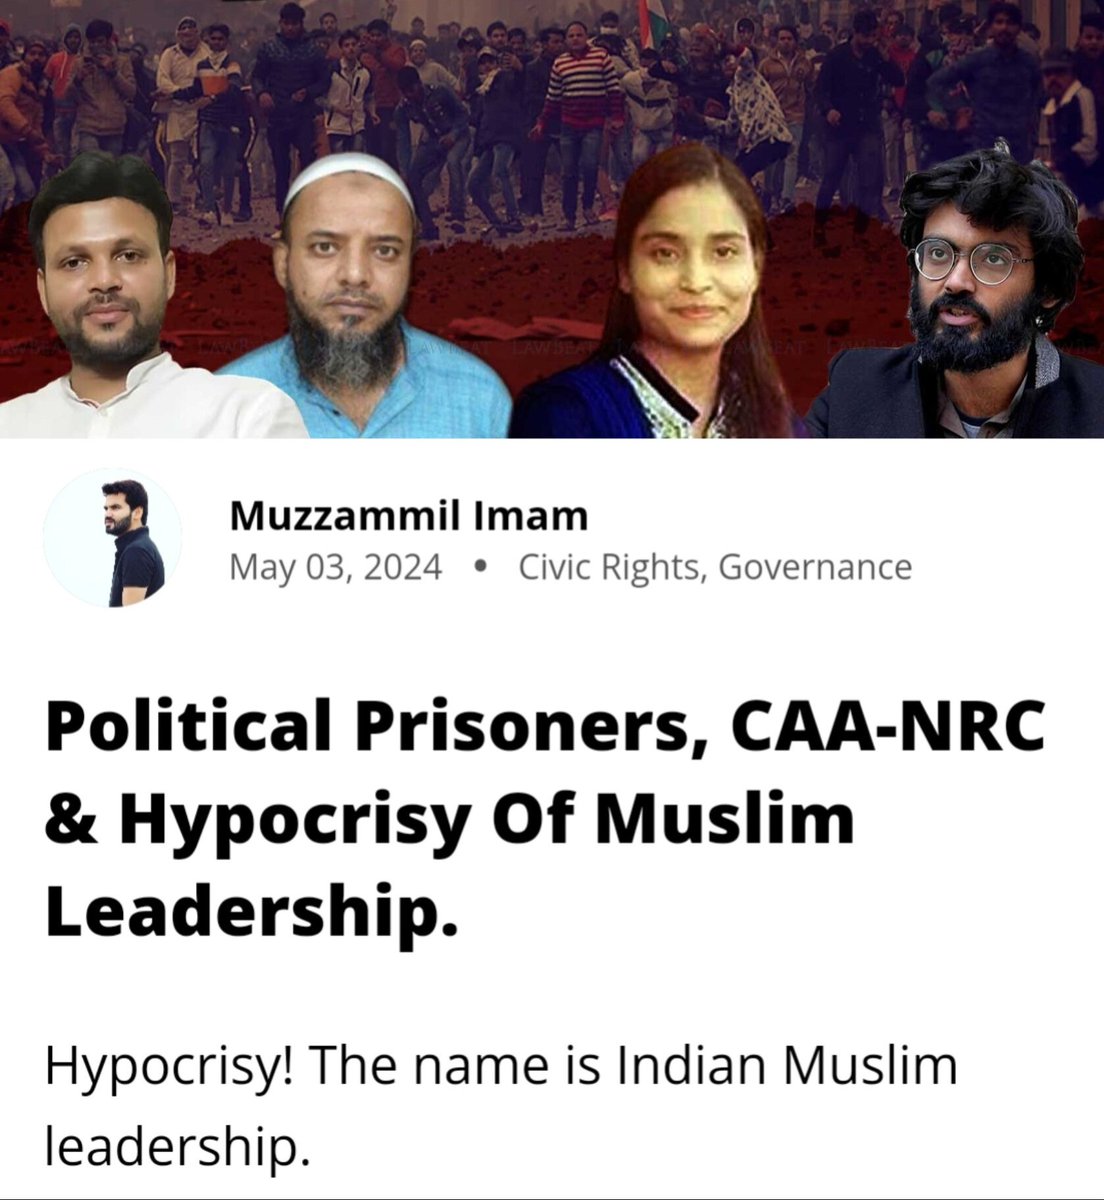 Muslim candidates contesting, Muslim leaders campaigning, Muslim intellectuals writing, left-liberals and others who talked about the CAA-NRC protests are silent. Why ? Are they afraid ?

#SharjeelImam #CAA #NRC
#LokSabhaElections2024
#IndianMuslims

youthkiawaaz.com/2024/05/politi…